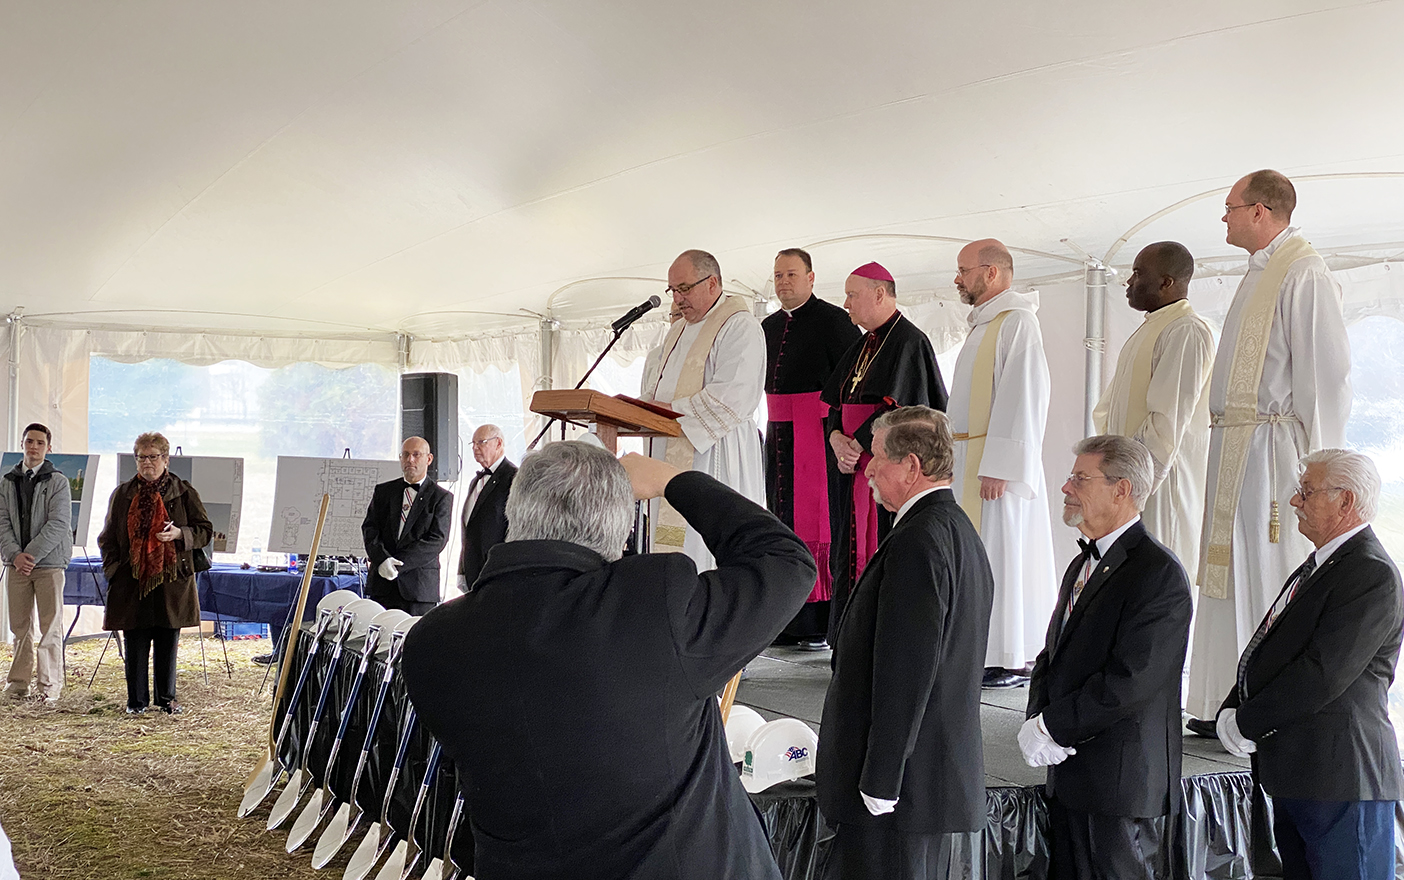 The Saints Peter and Paul Parish and School community celebrates the opening of their new campus.